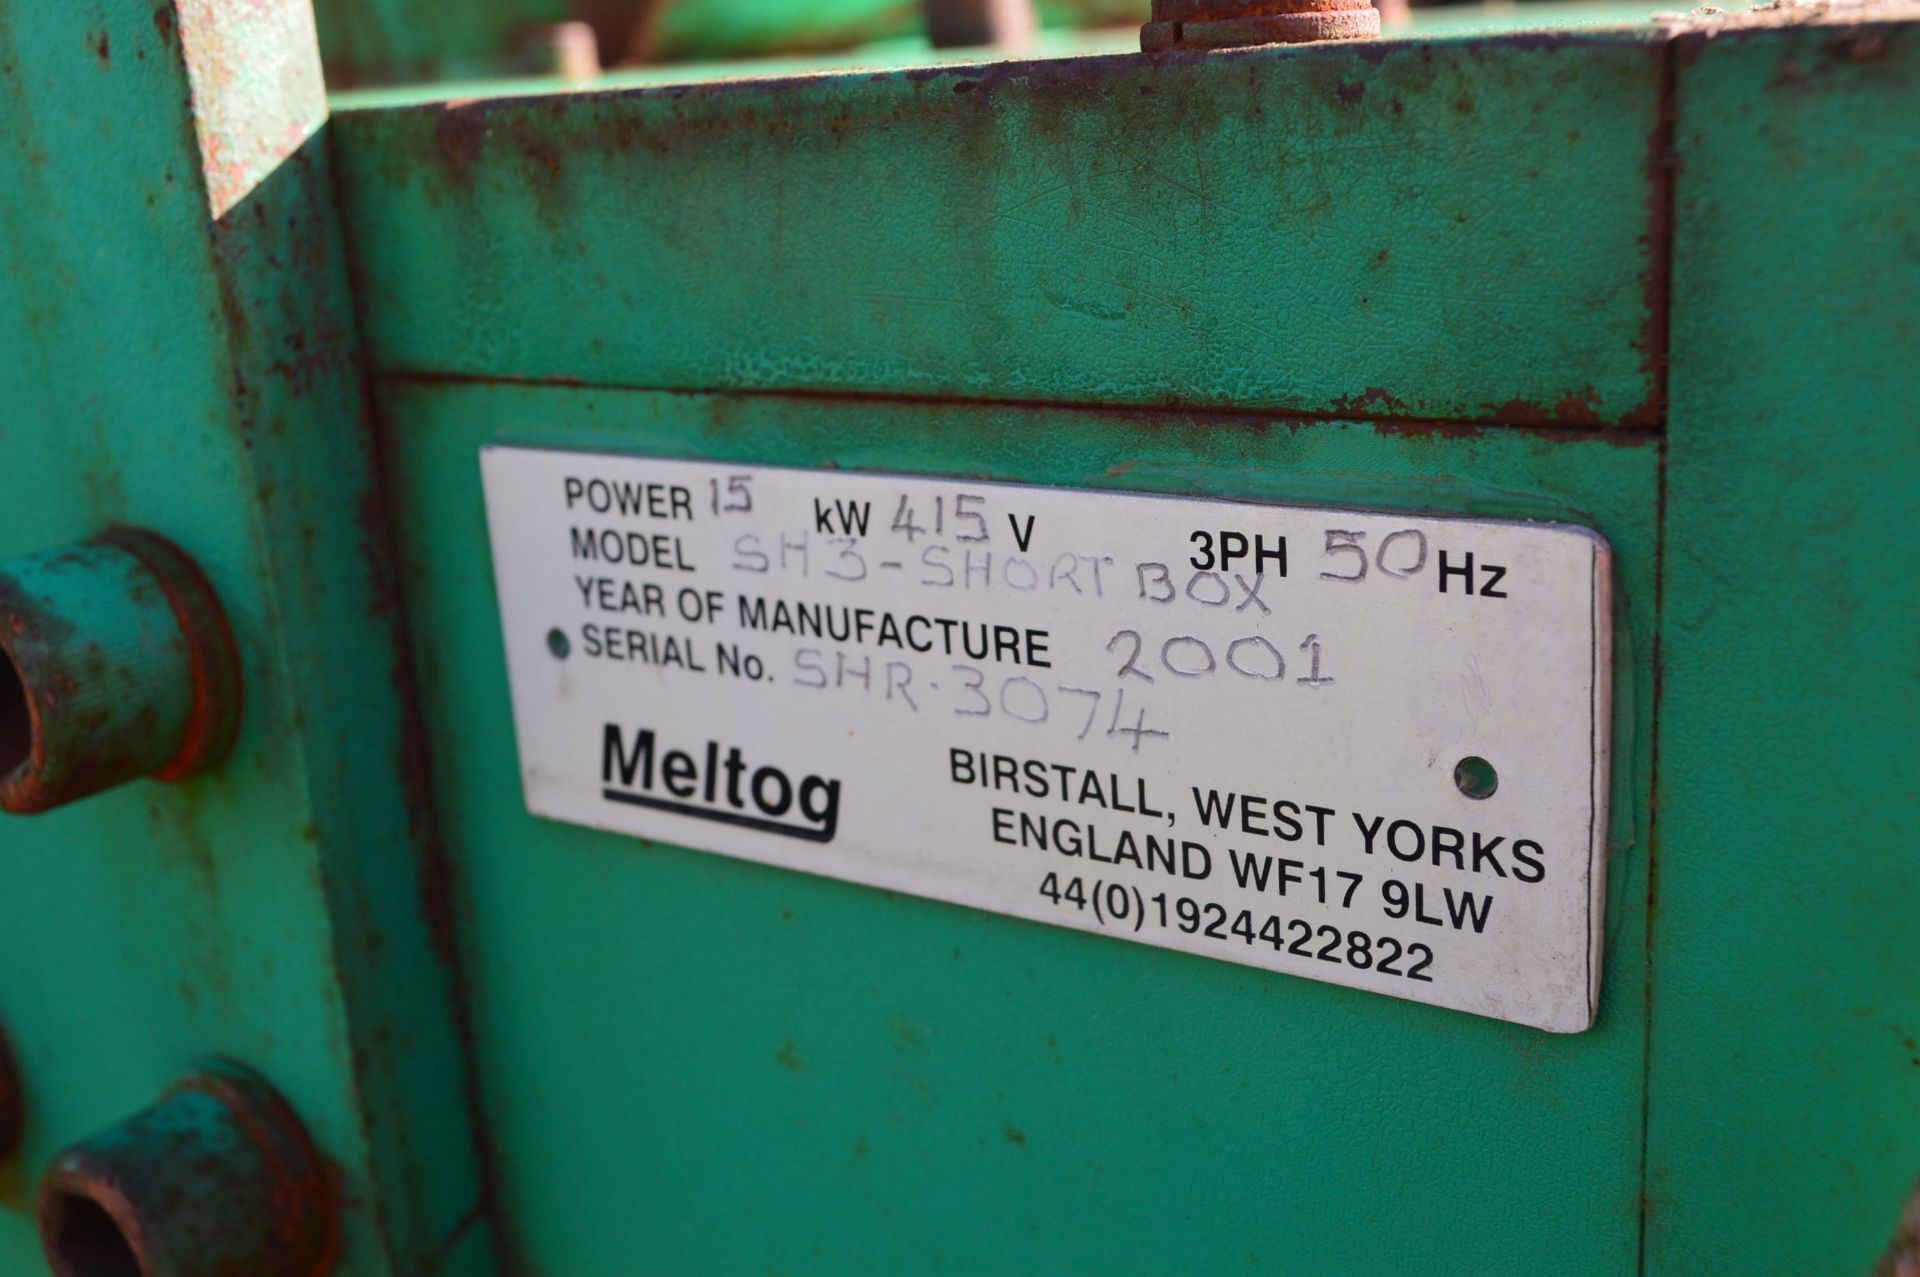 Meltog SH3-SHORTBOX SHREDDER, serial no. SHR.3074, year of manufacture 2001, 700mm wide, NOTE 5% - Image 2 of 4